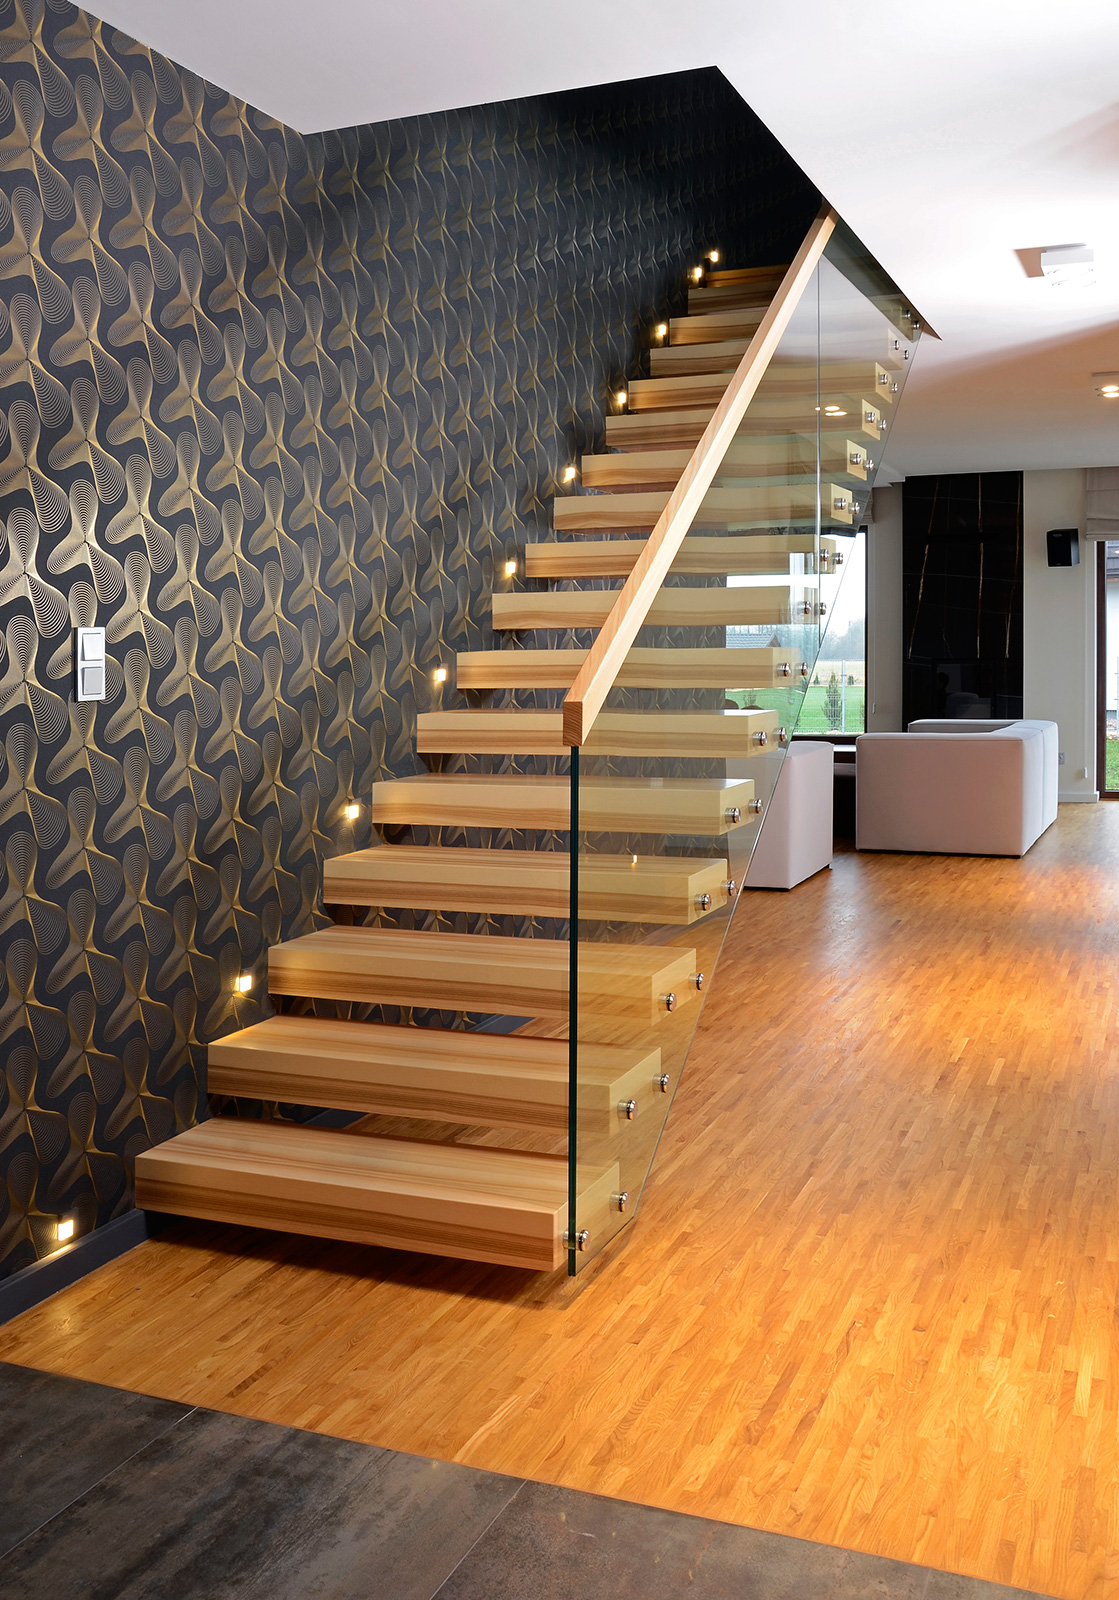 P150 Cantilevered stairs